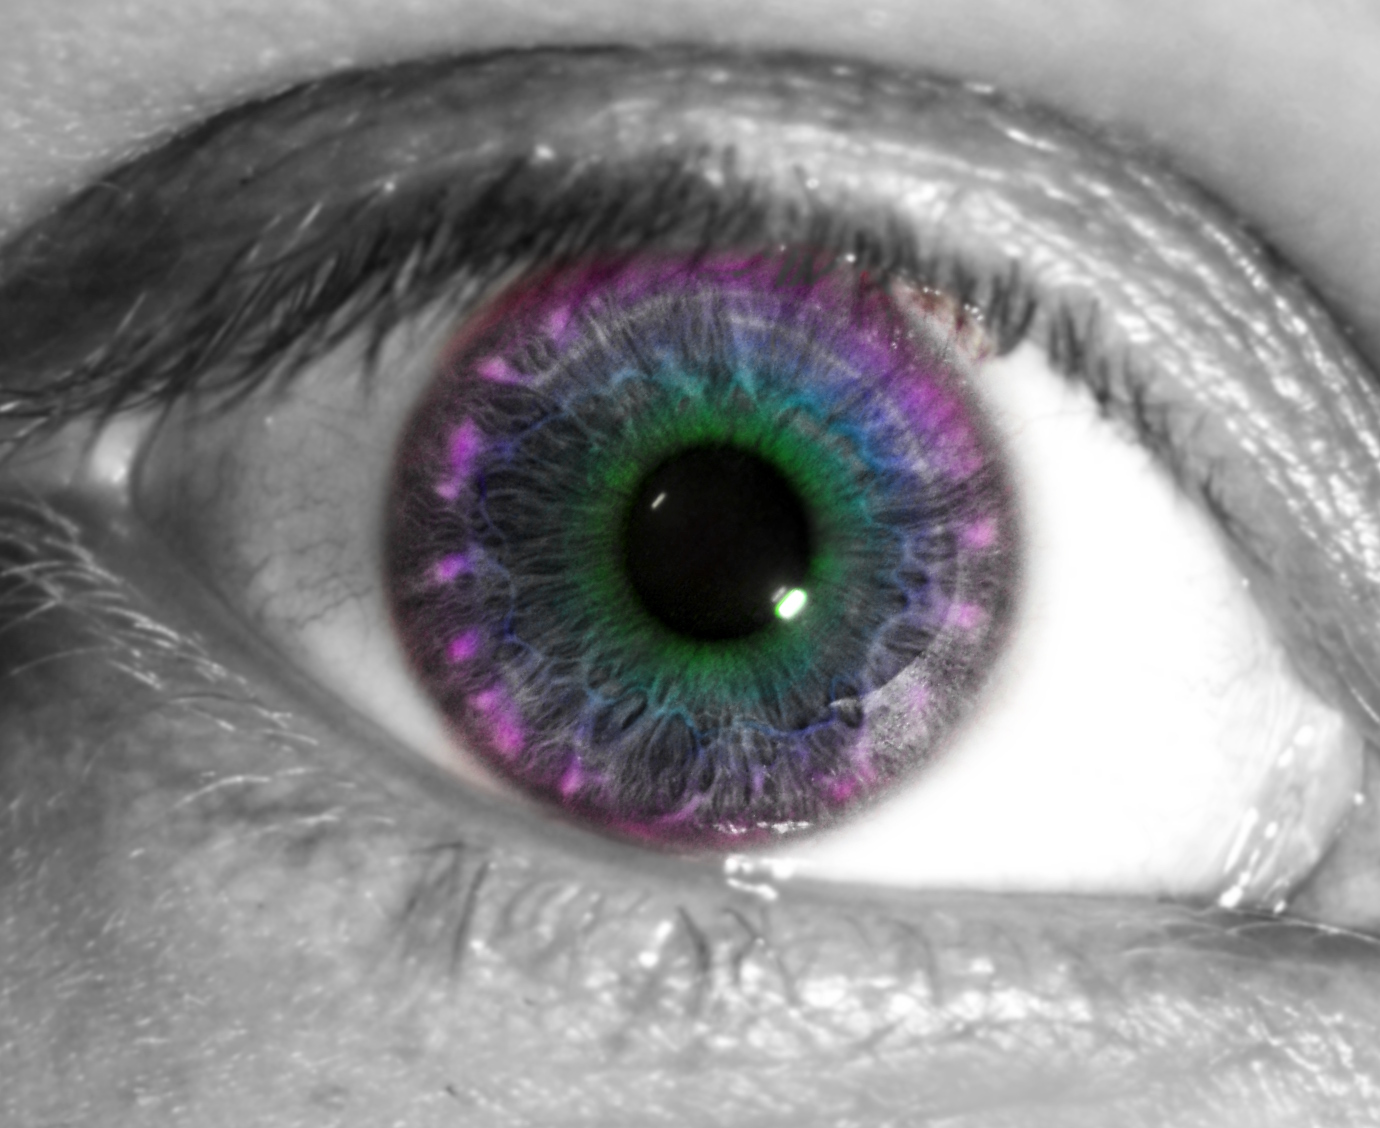 an eye with bright green and blue colors